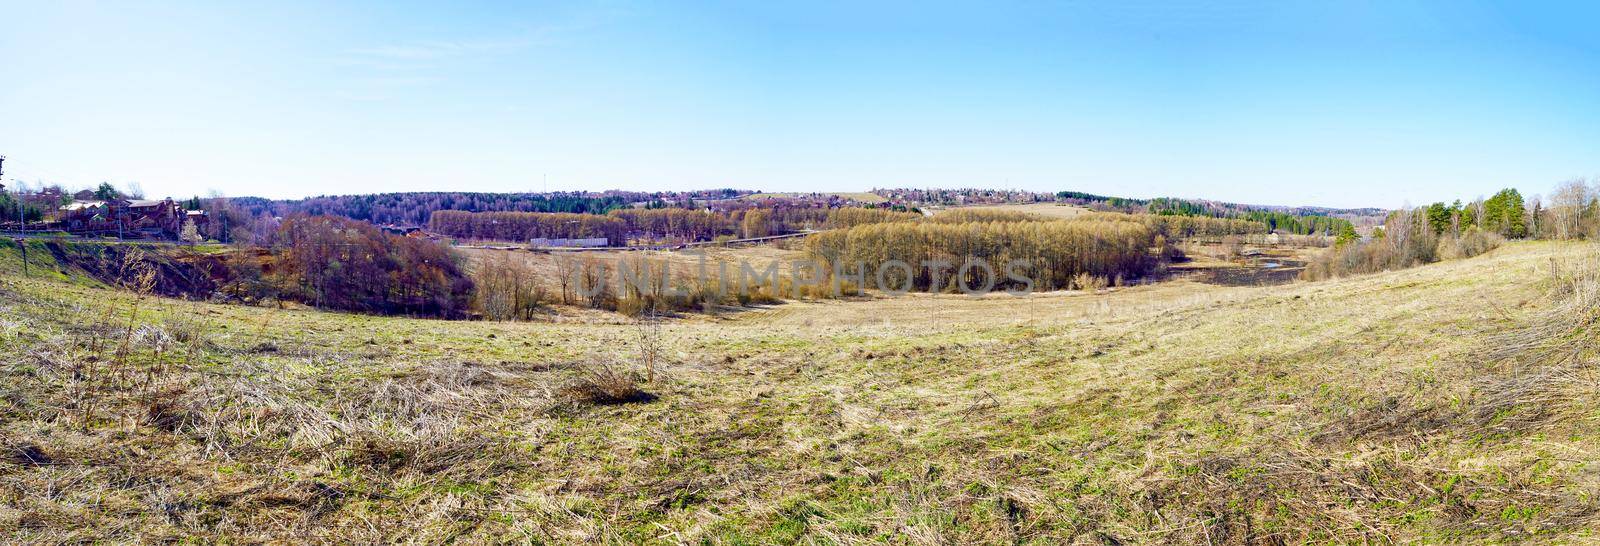 Panorama. A hilly landscape in early spring, when the grass is just beginning to turn green. Spring Russian landscape, Moscow region, Russia.